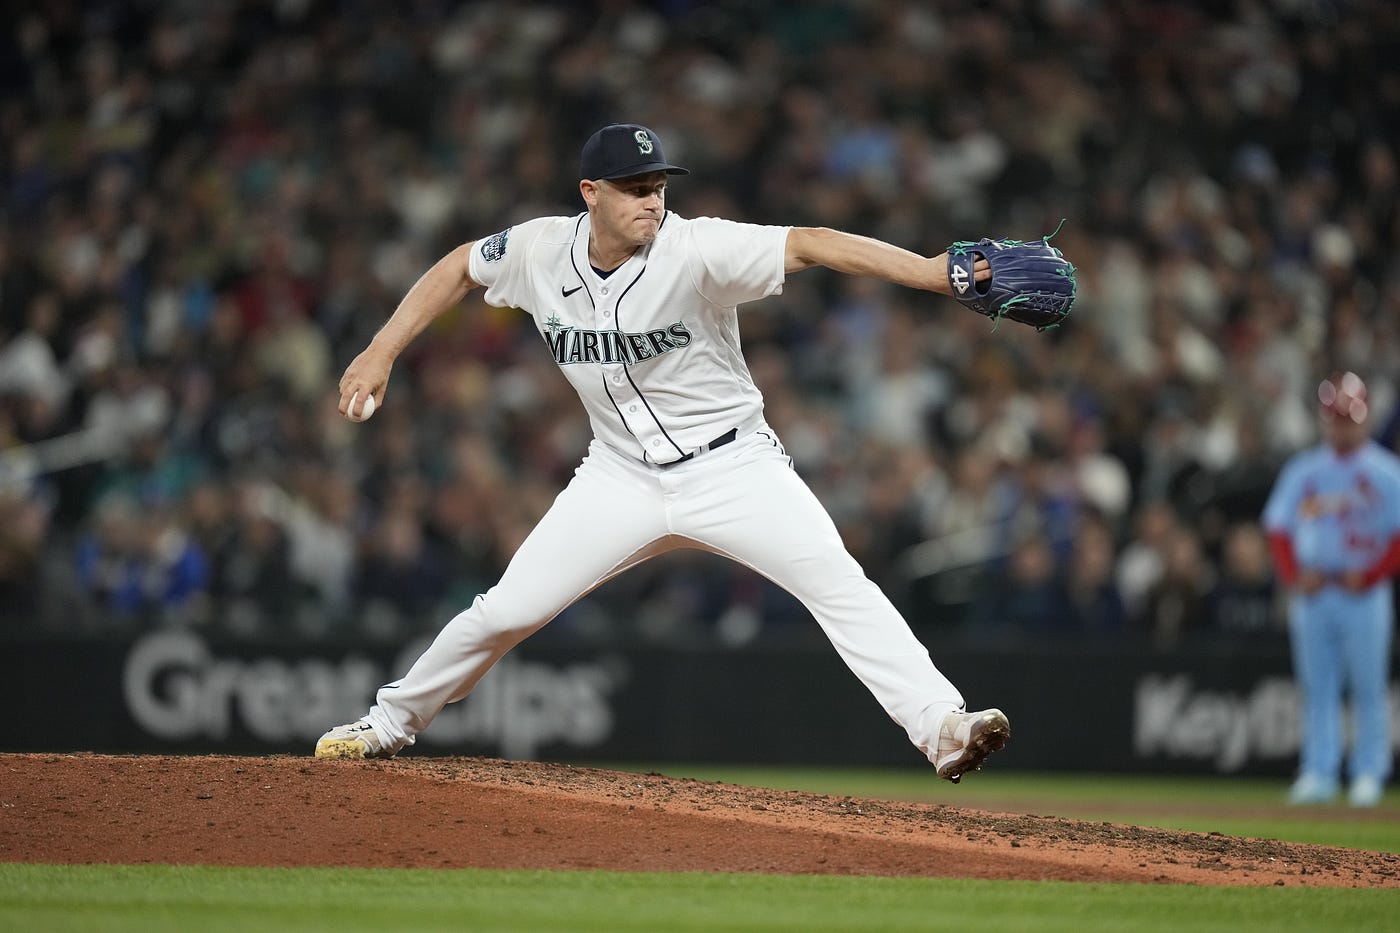 Seattle Mariners' Ty France is Going to Get That Dad Strength